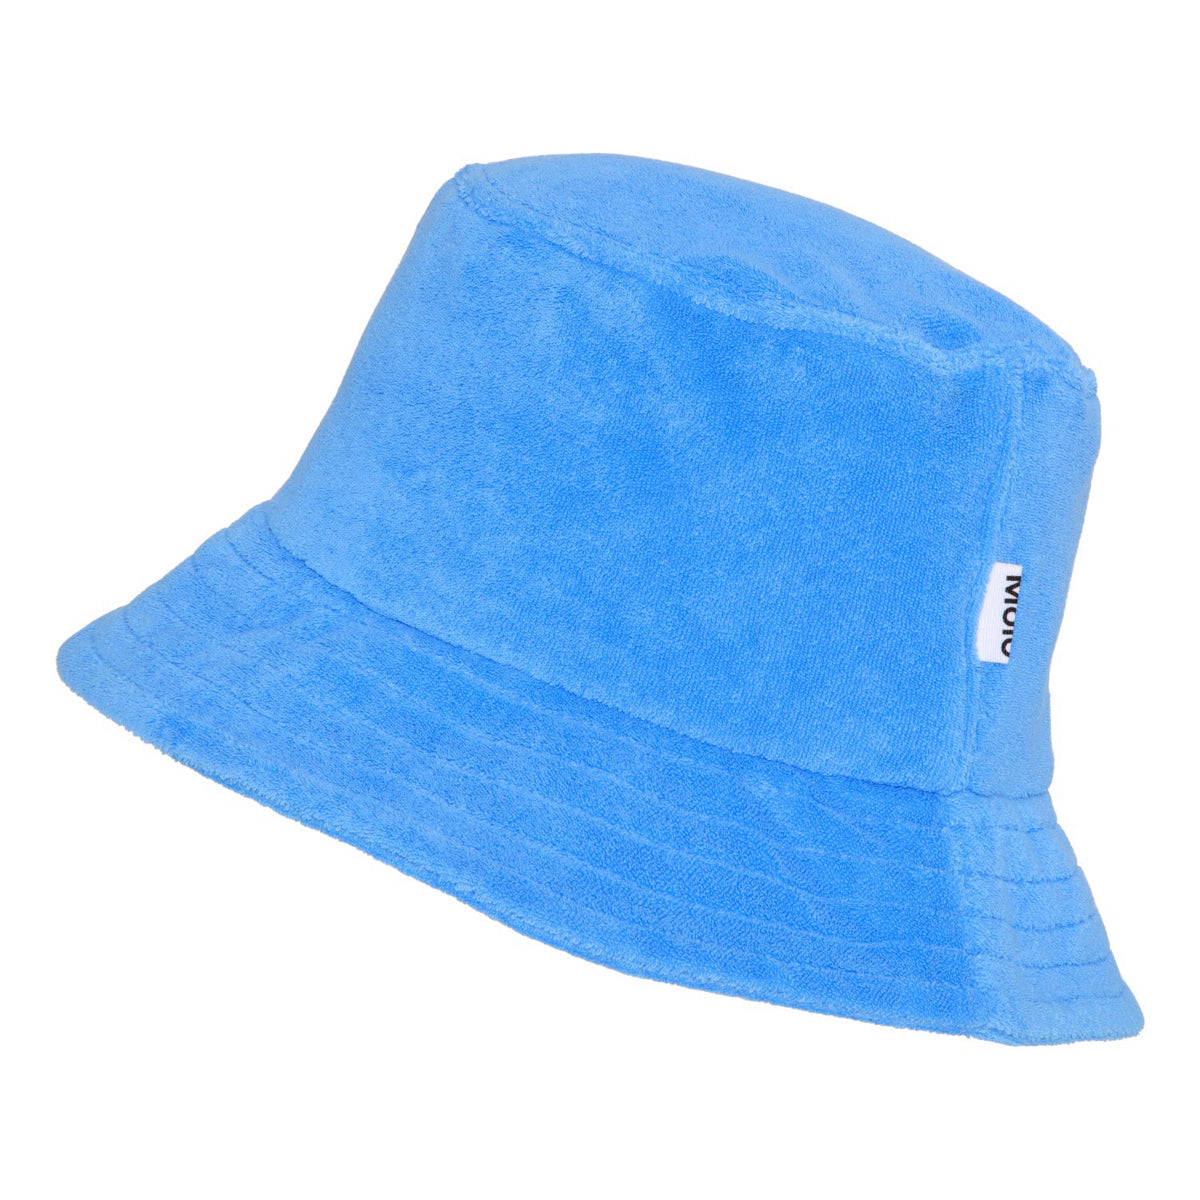 The Sage Bucket Hat from Molo. Blue bucket hat in a soft cotton terry quality with turned down brim.